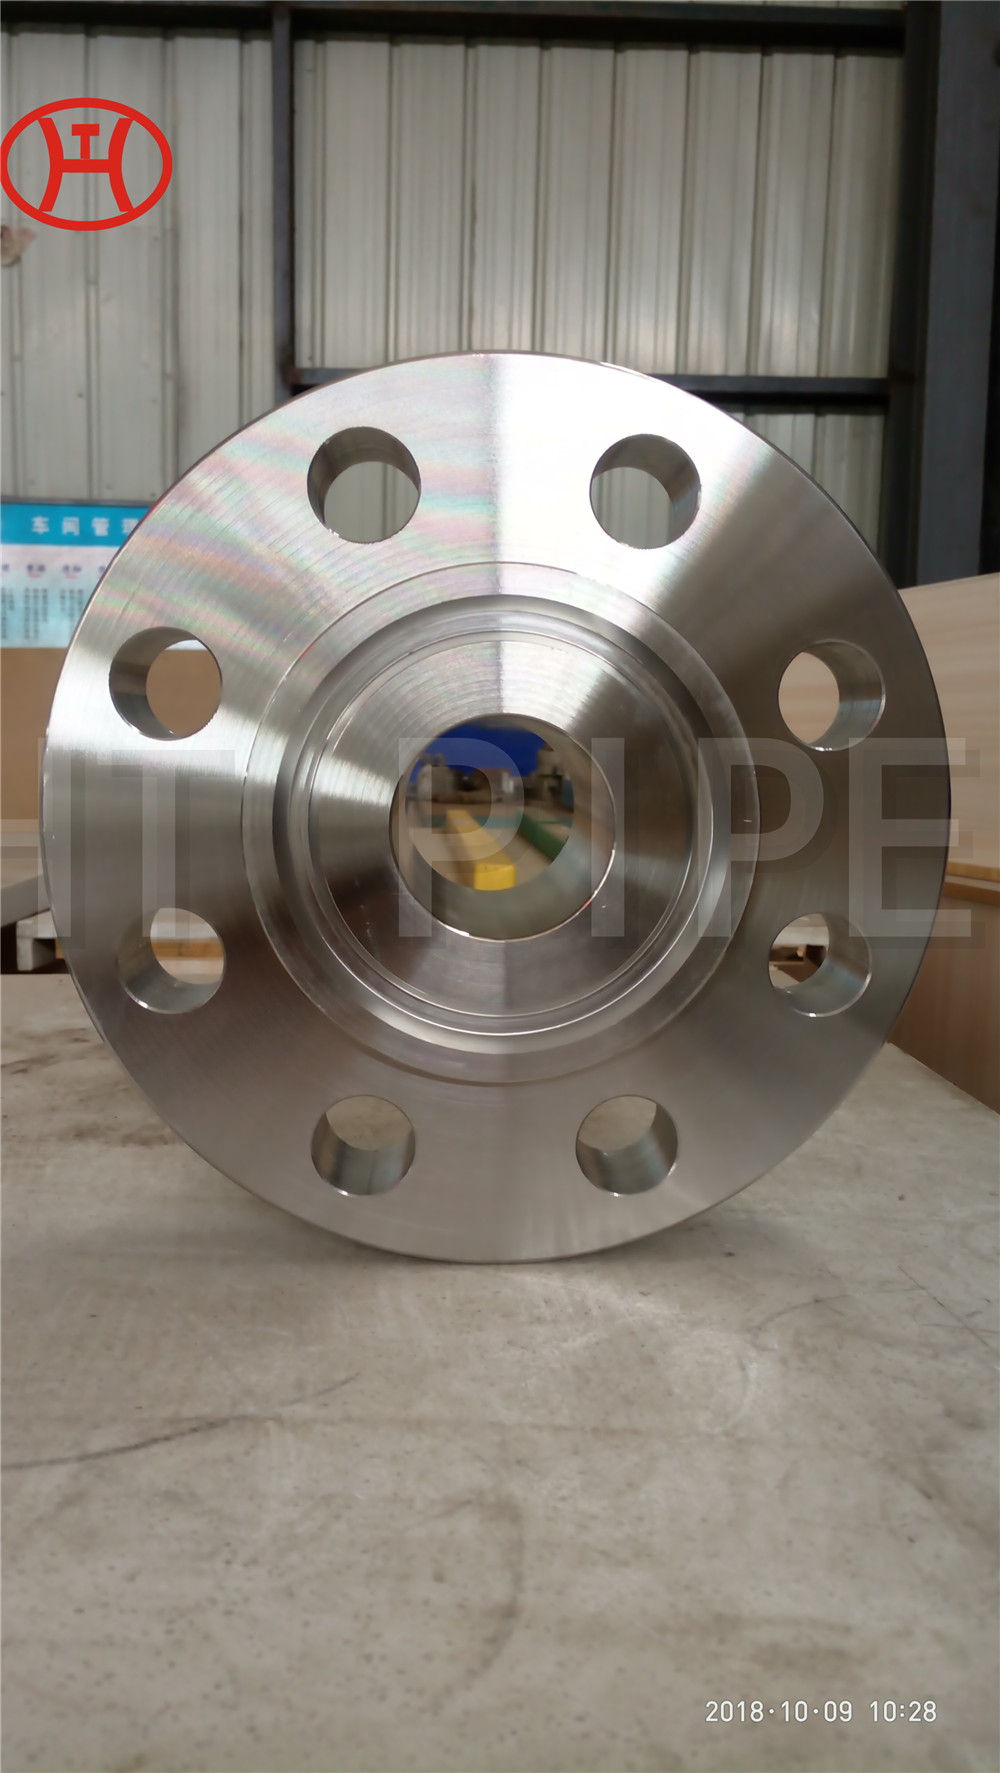 Concentric Serratioin Tongue and Groove Face Flange